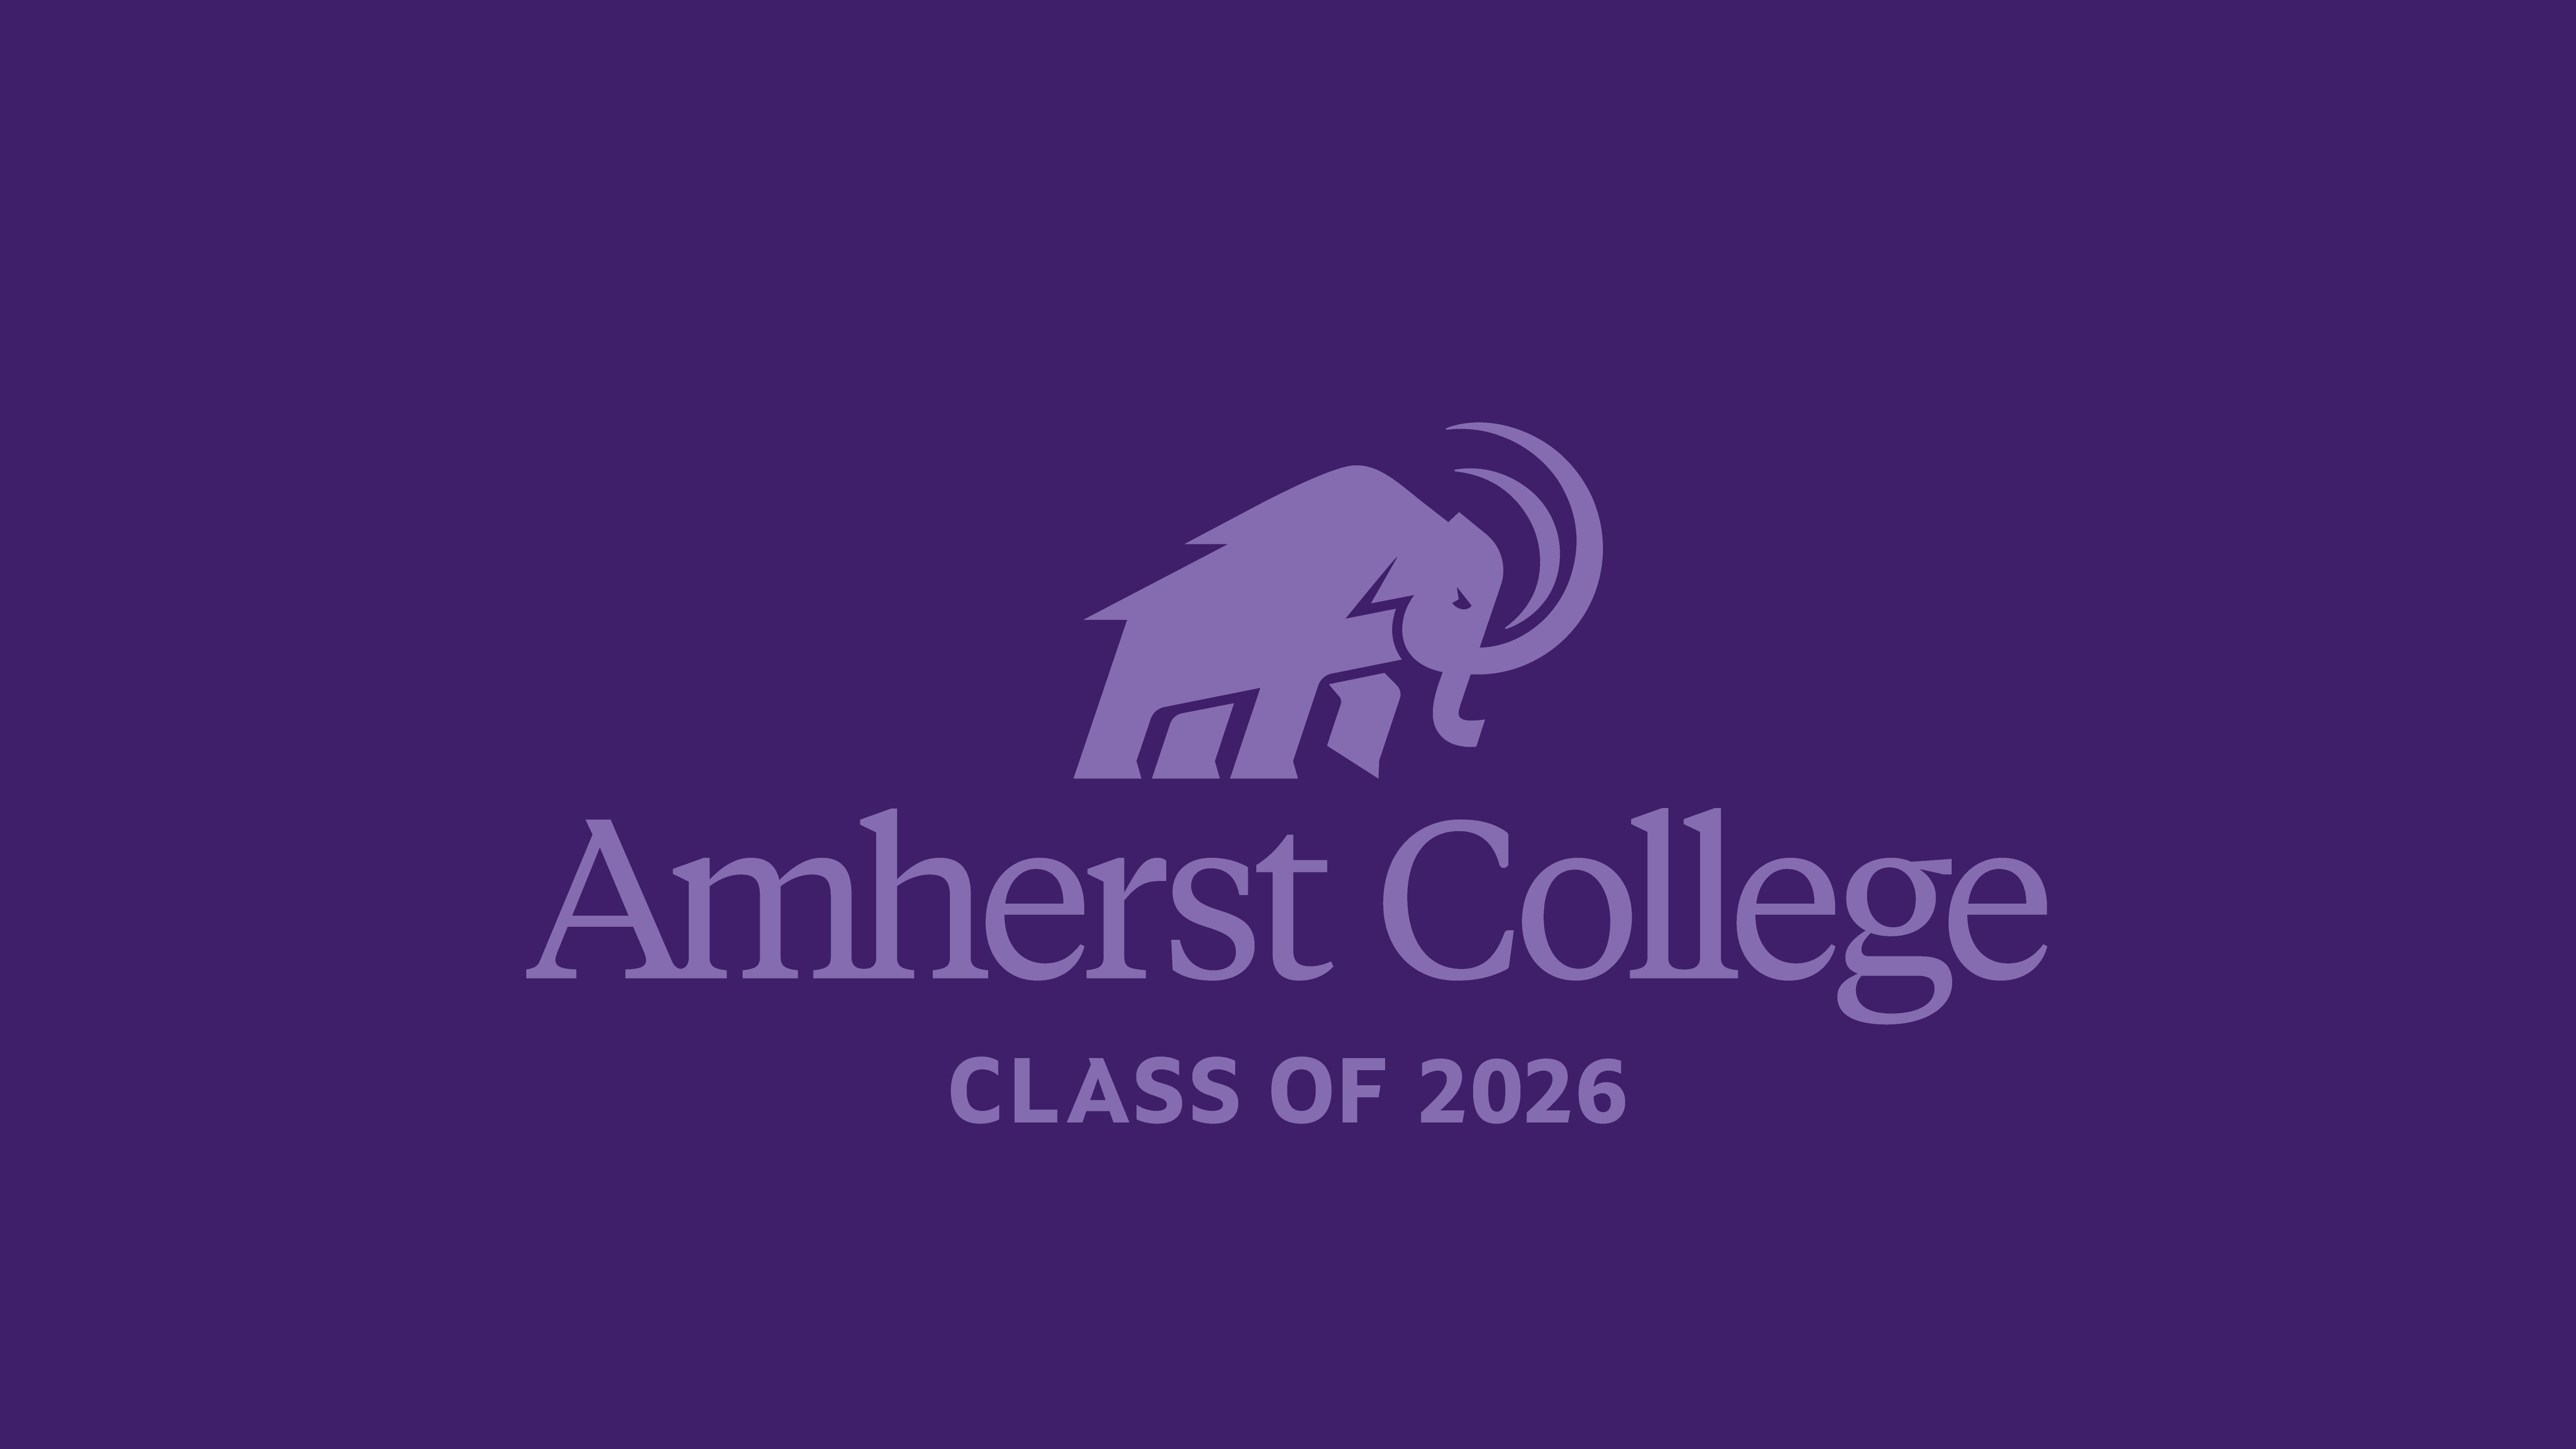 Mammoth on purple background with Class of 2026